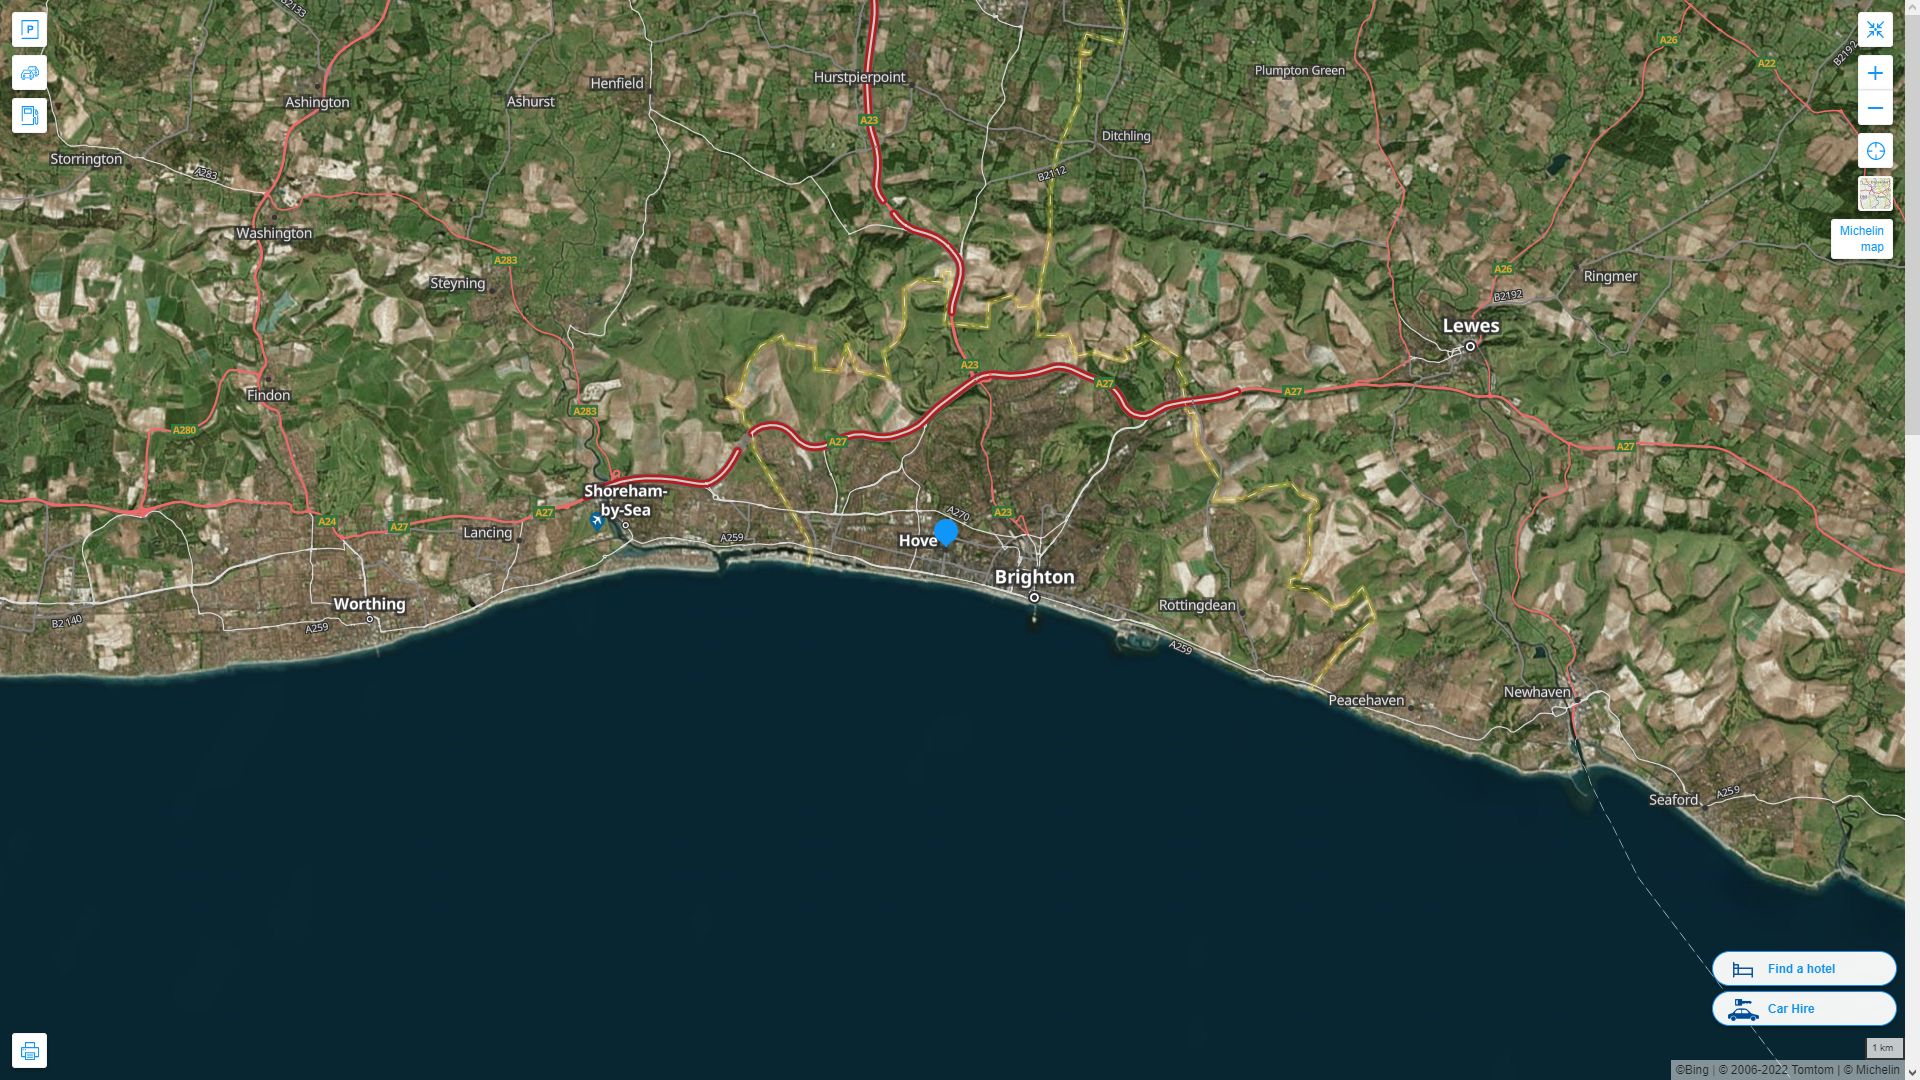 Hove Highway and Road Map with Satellite View